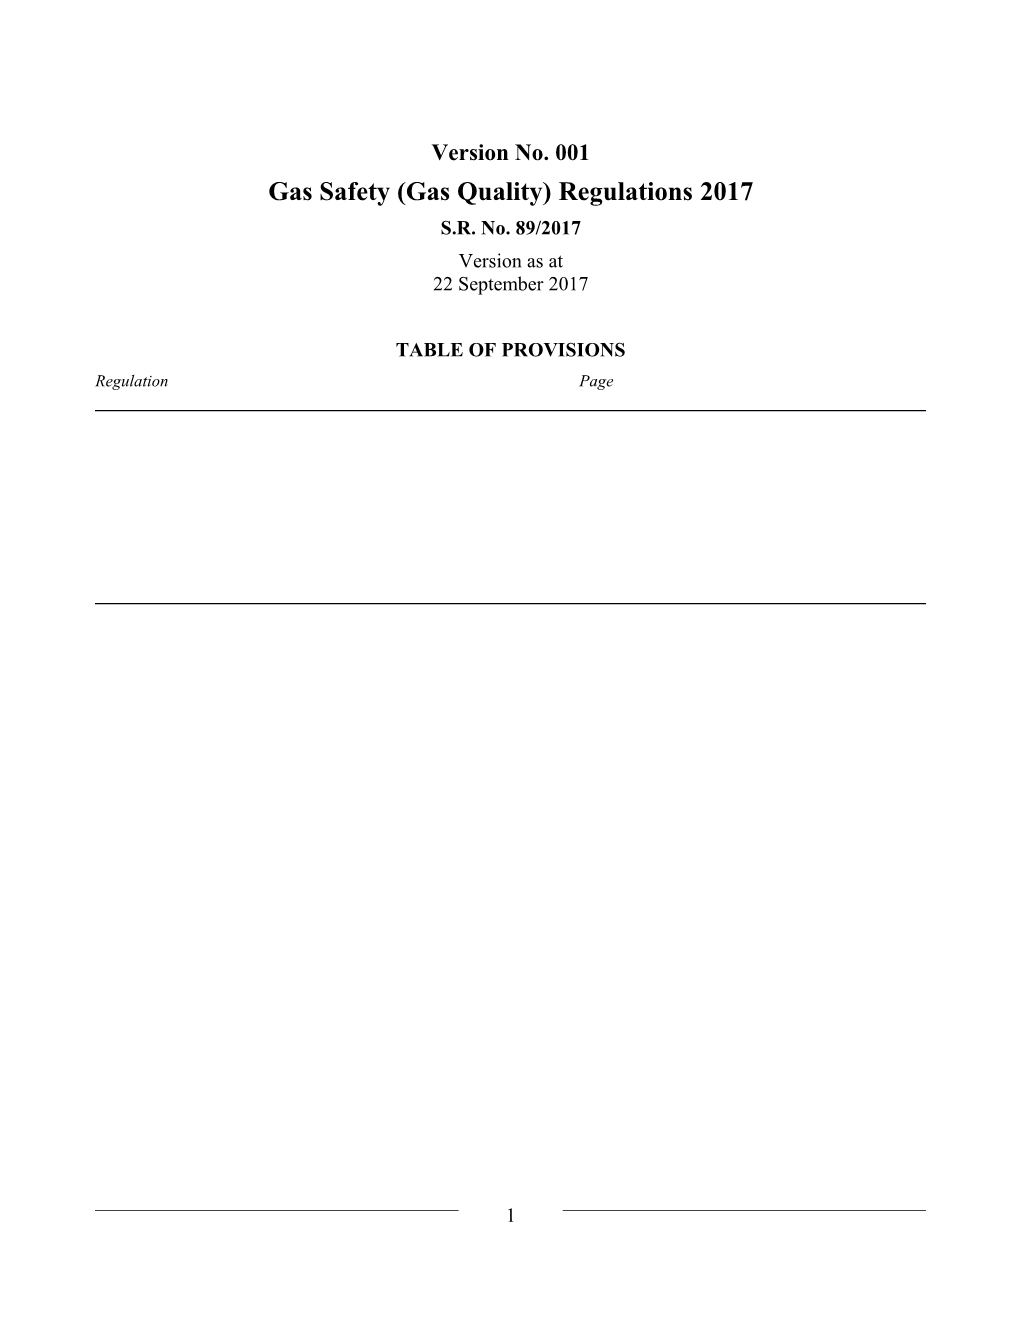 Gas Safety (Gas Quality) Regulations 2017